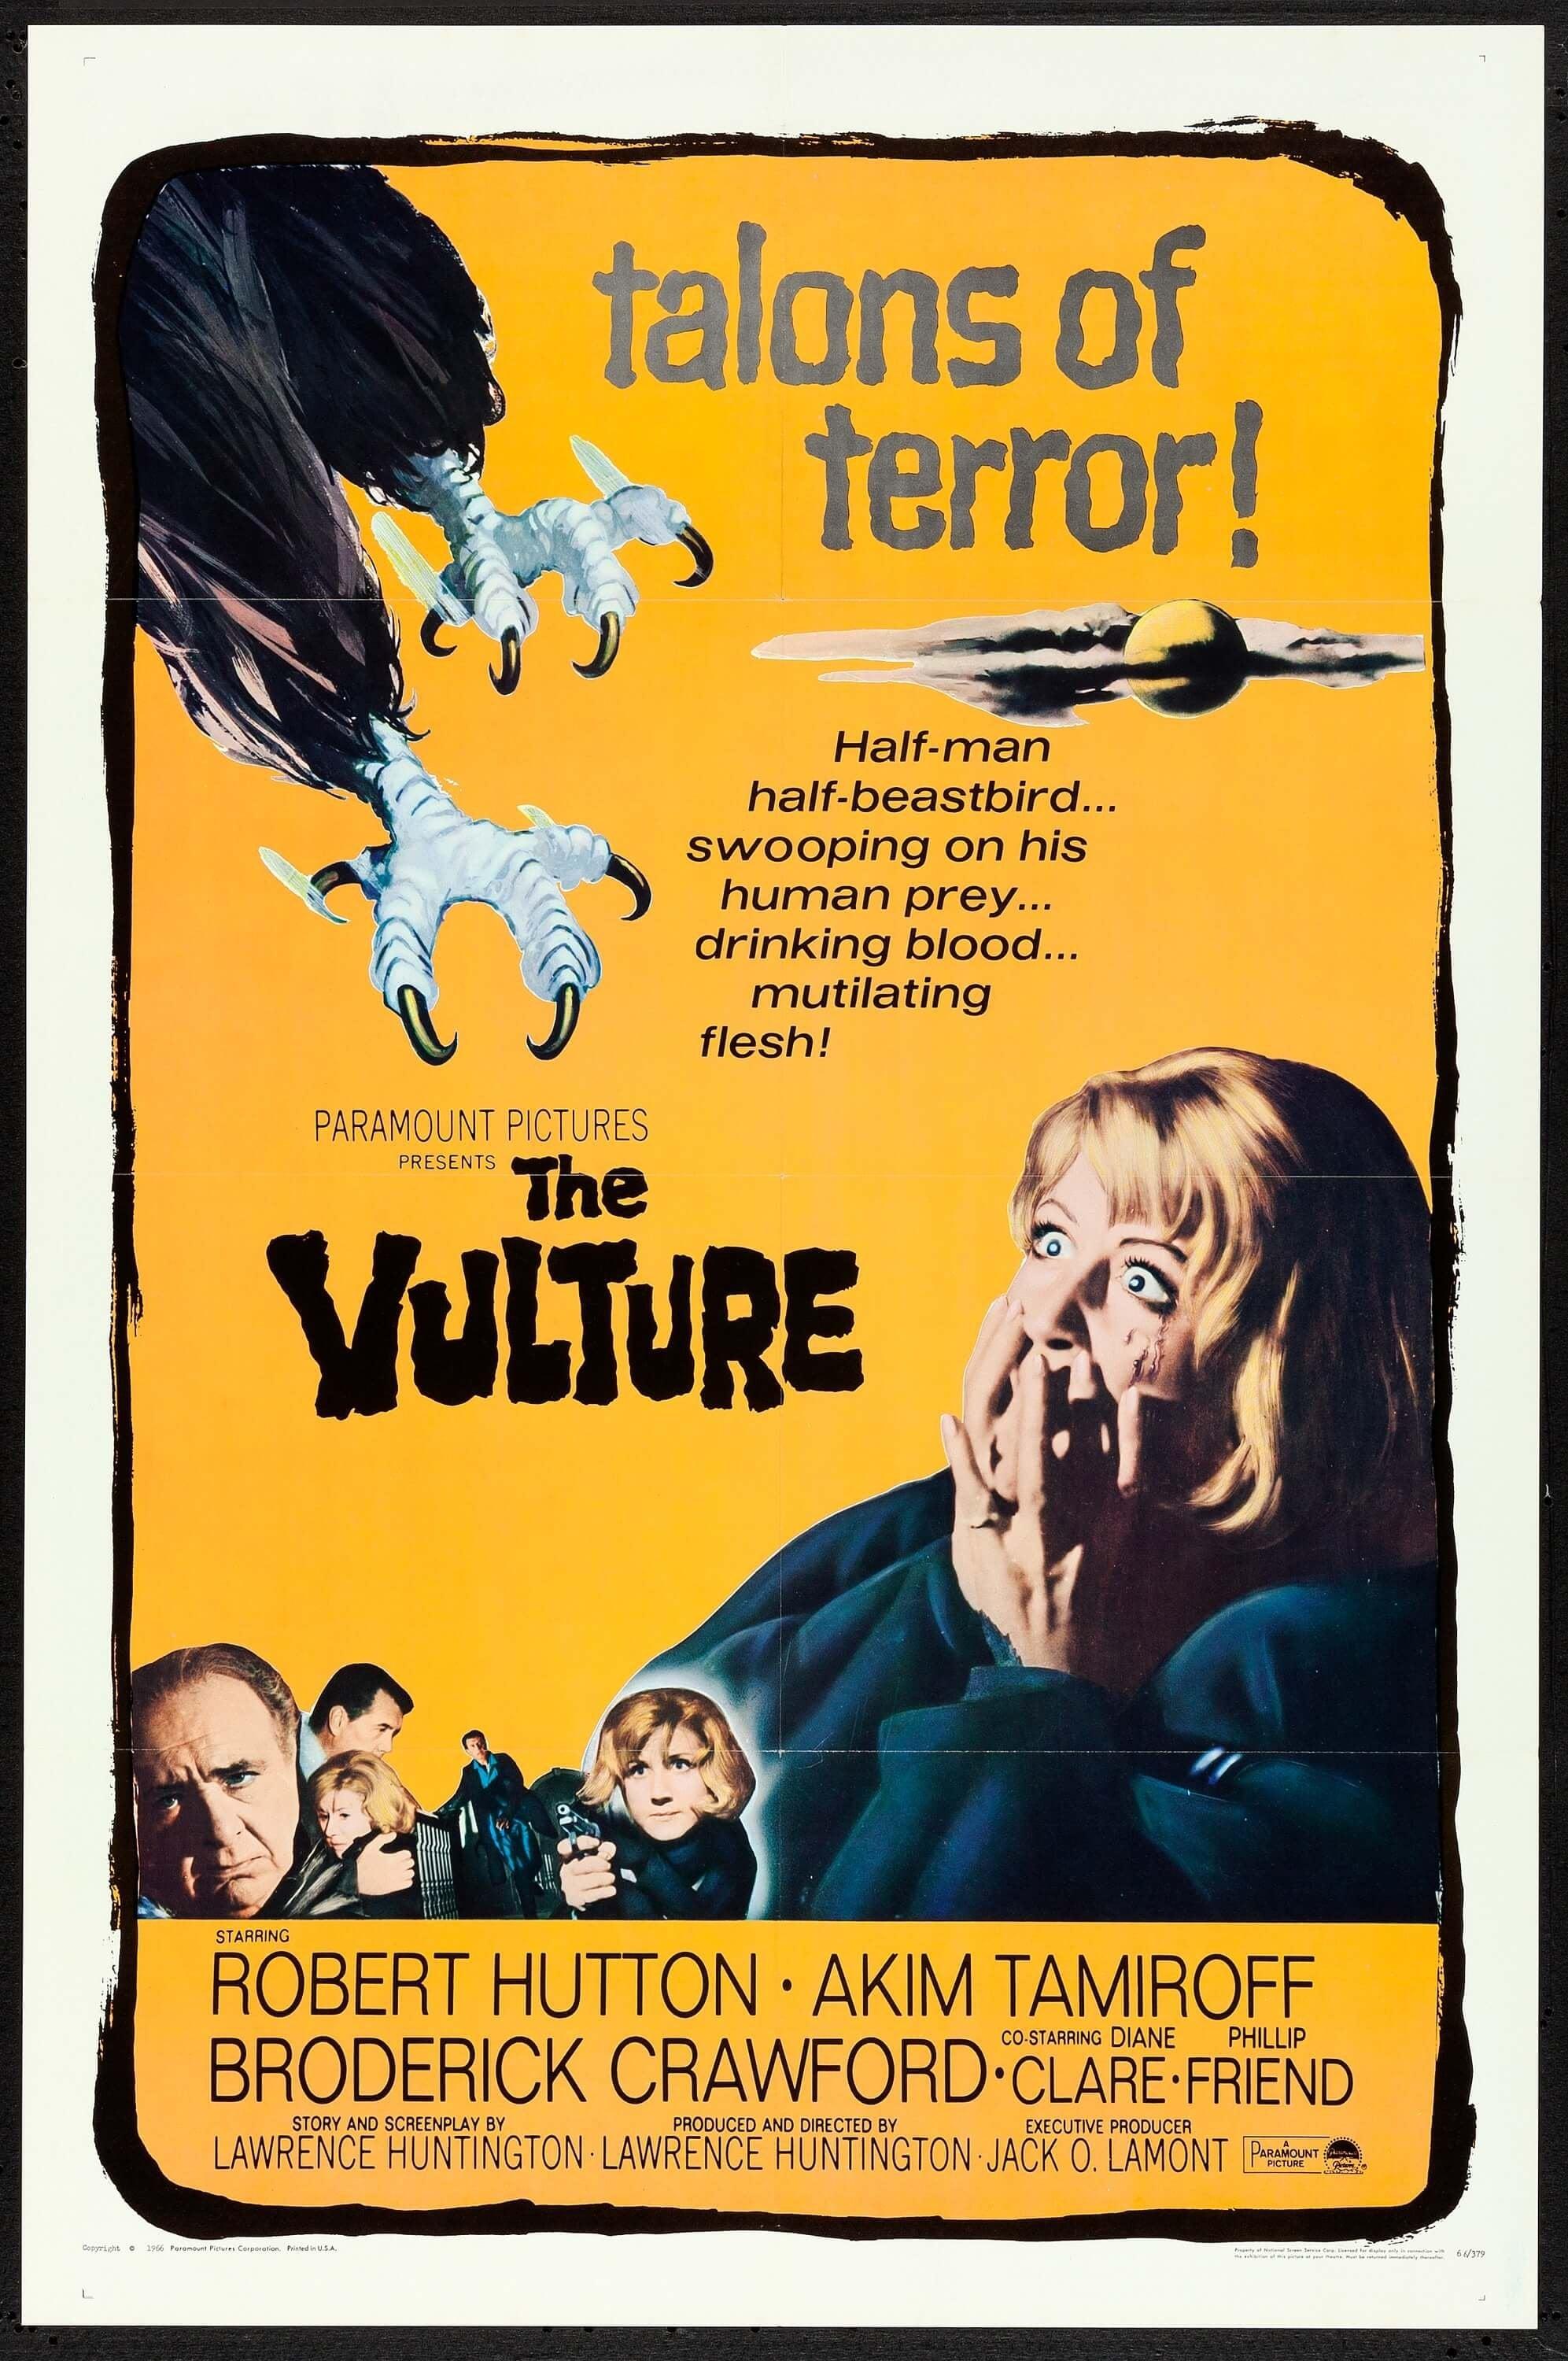 The Vulture poster